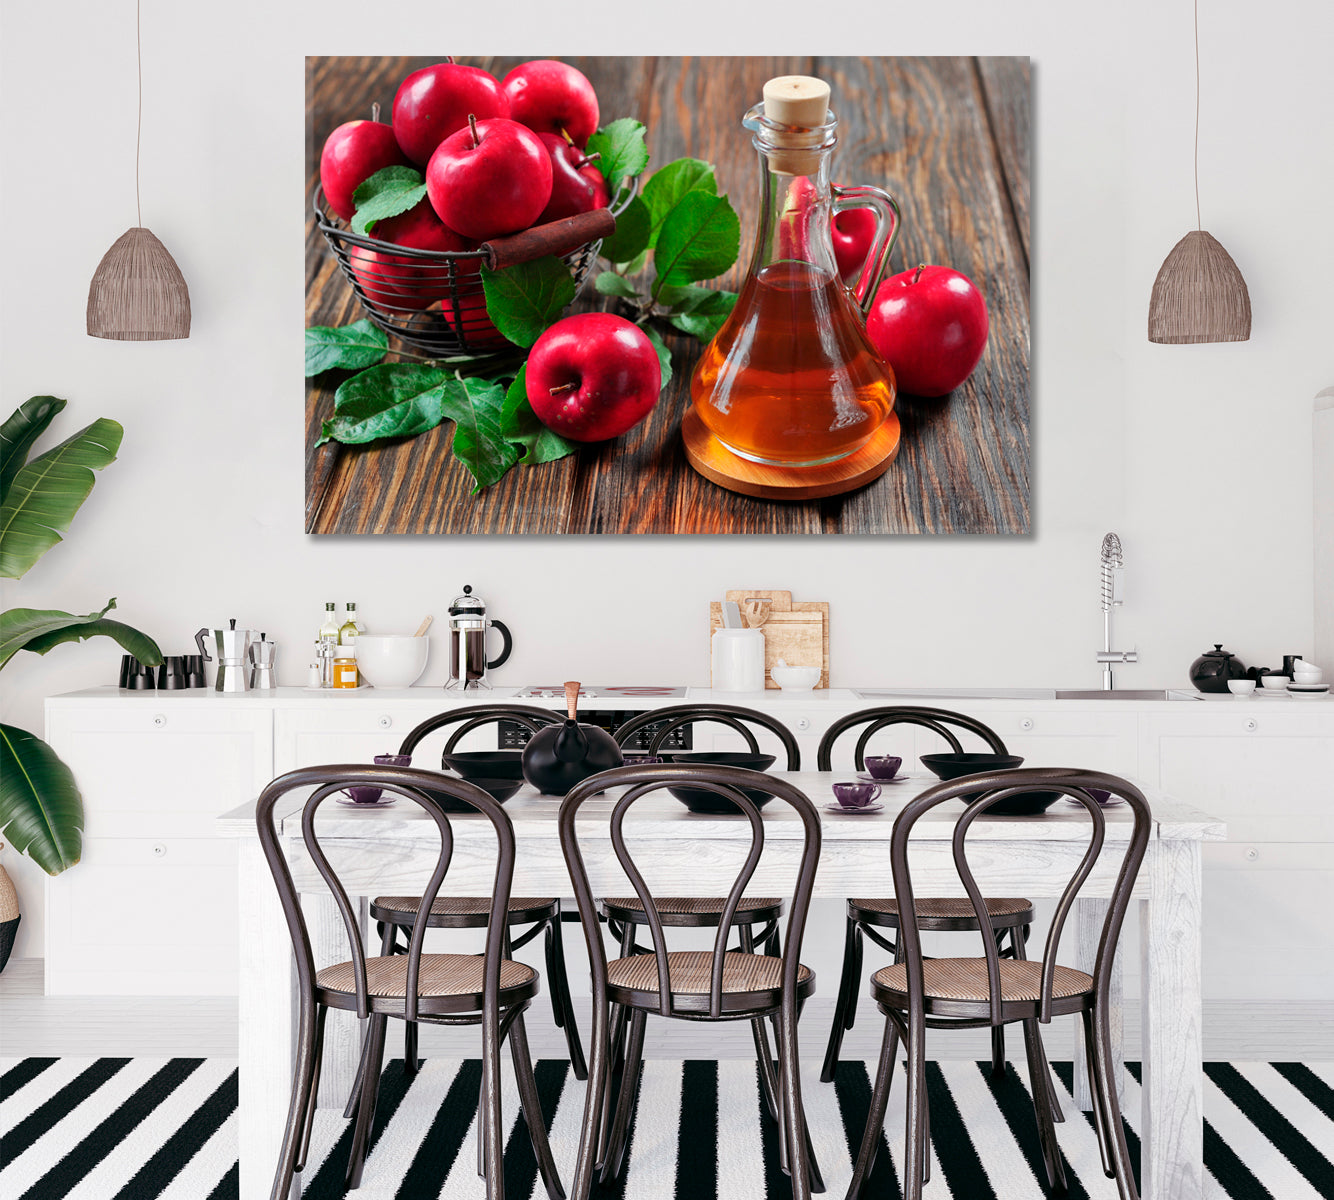 Apple Cider Vinegar and Basket with Apples Canvas Print ArtLexy 1 Panel 24"x16" inches 